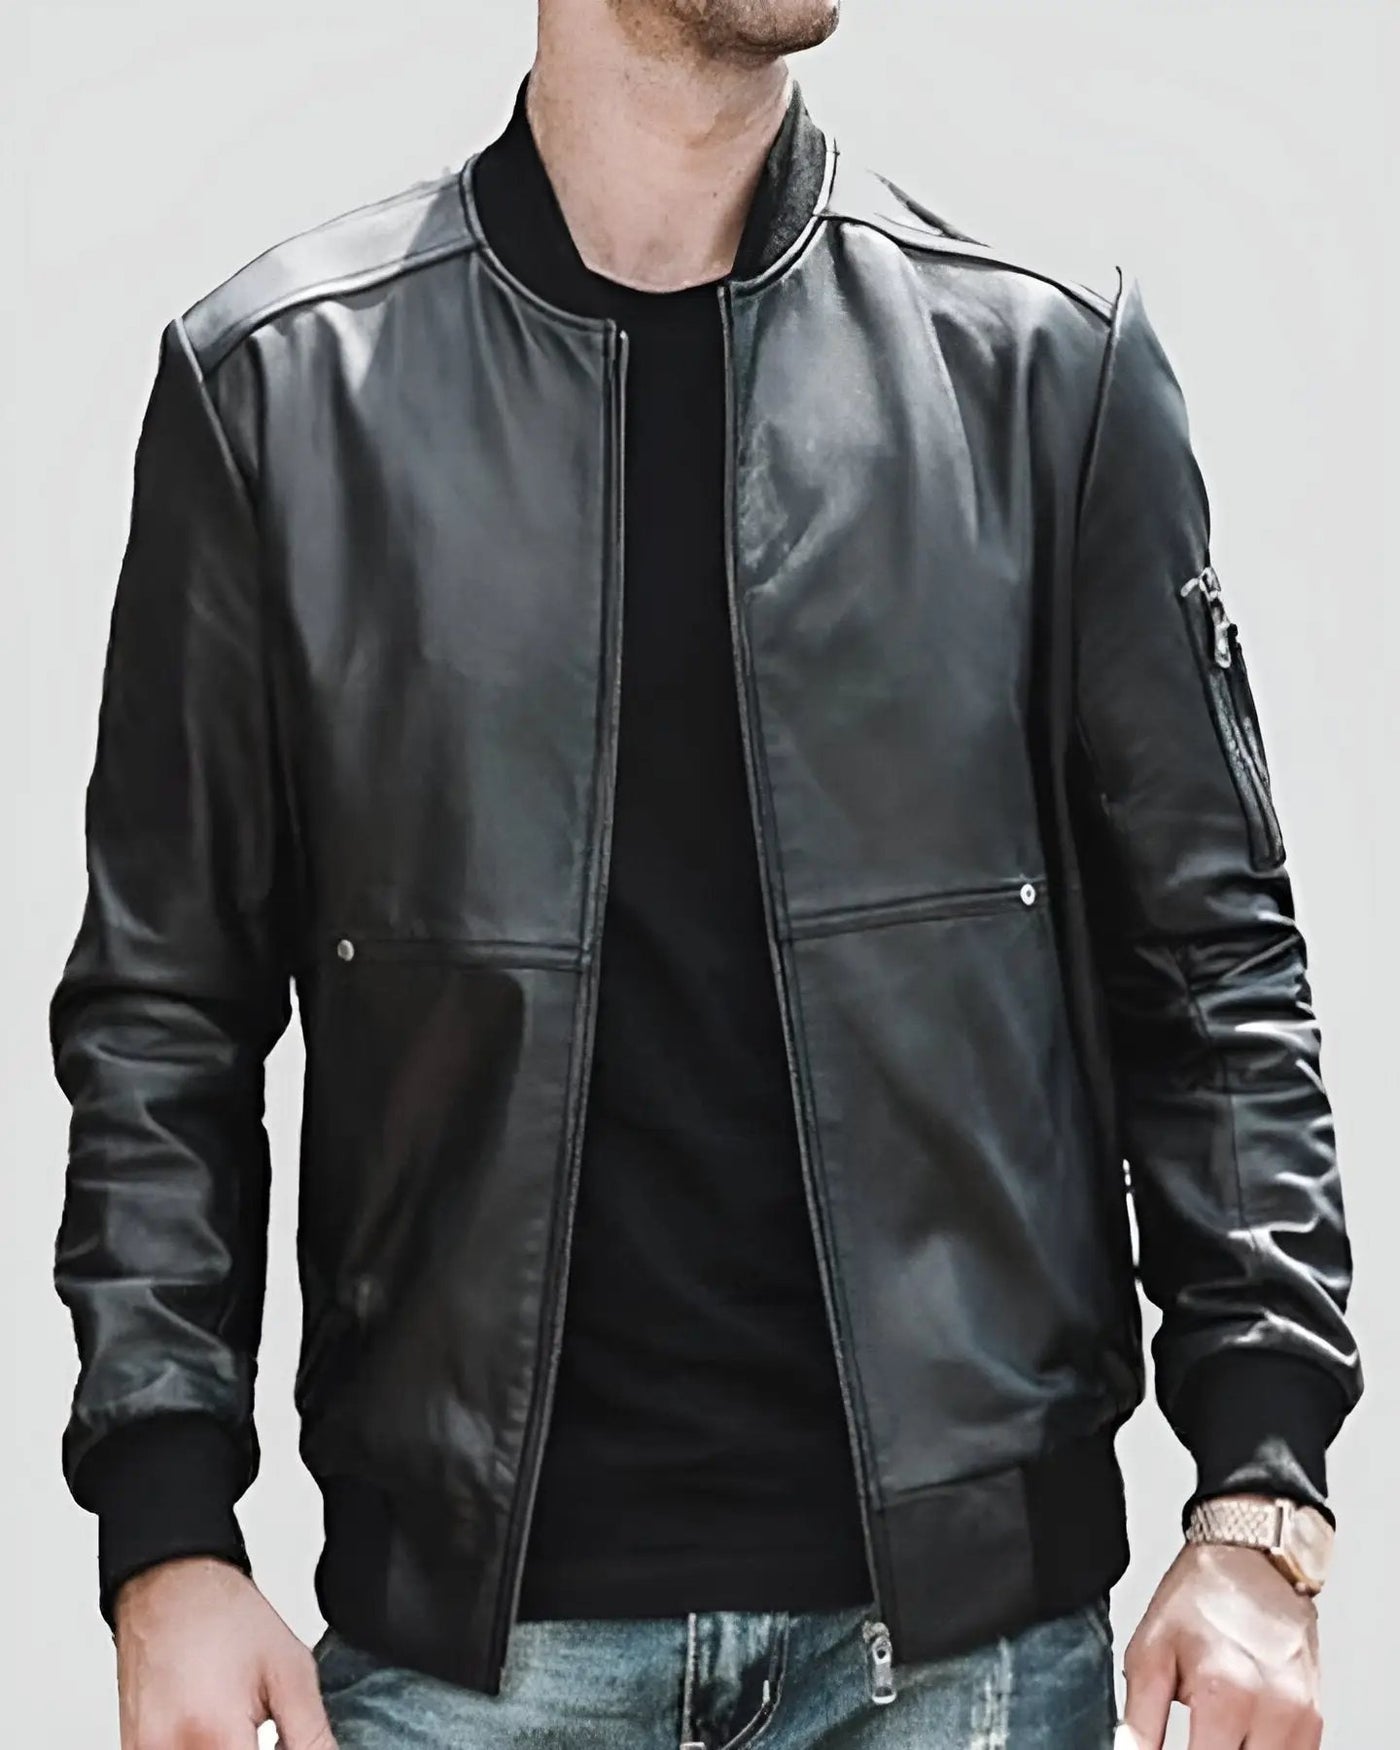 NYC Leather Jackets - Official Online Store